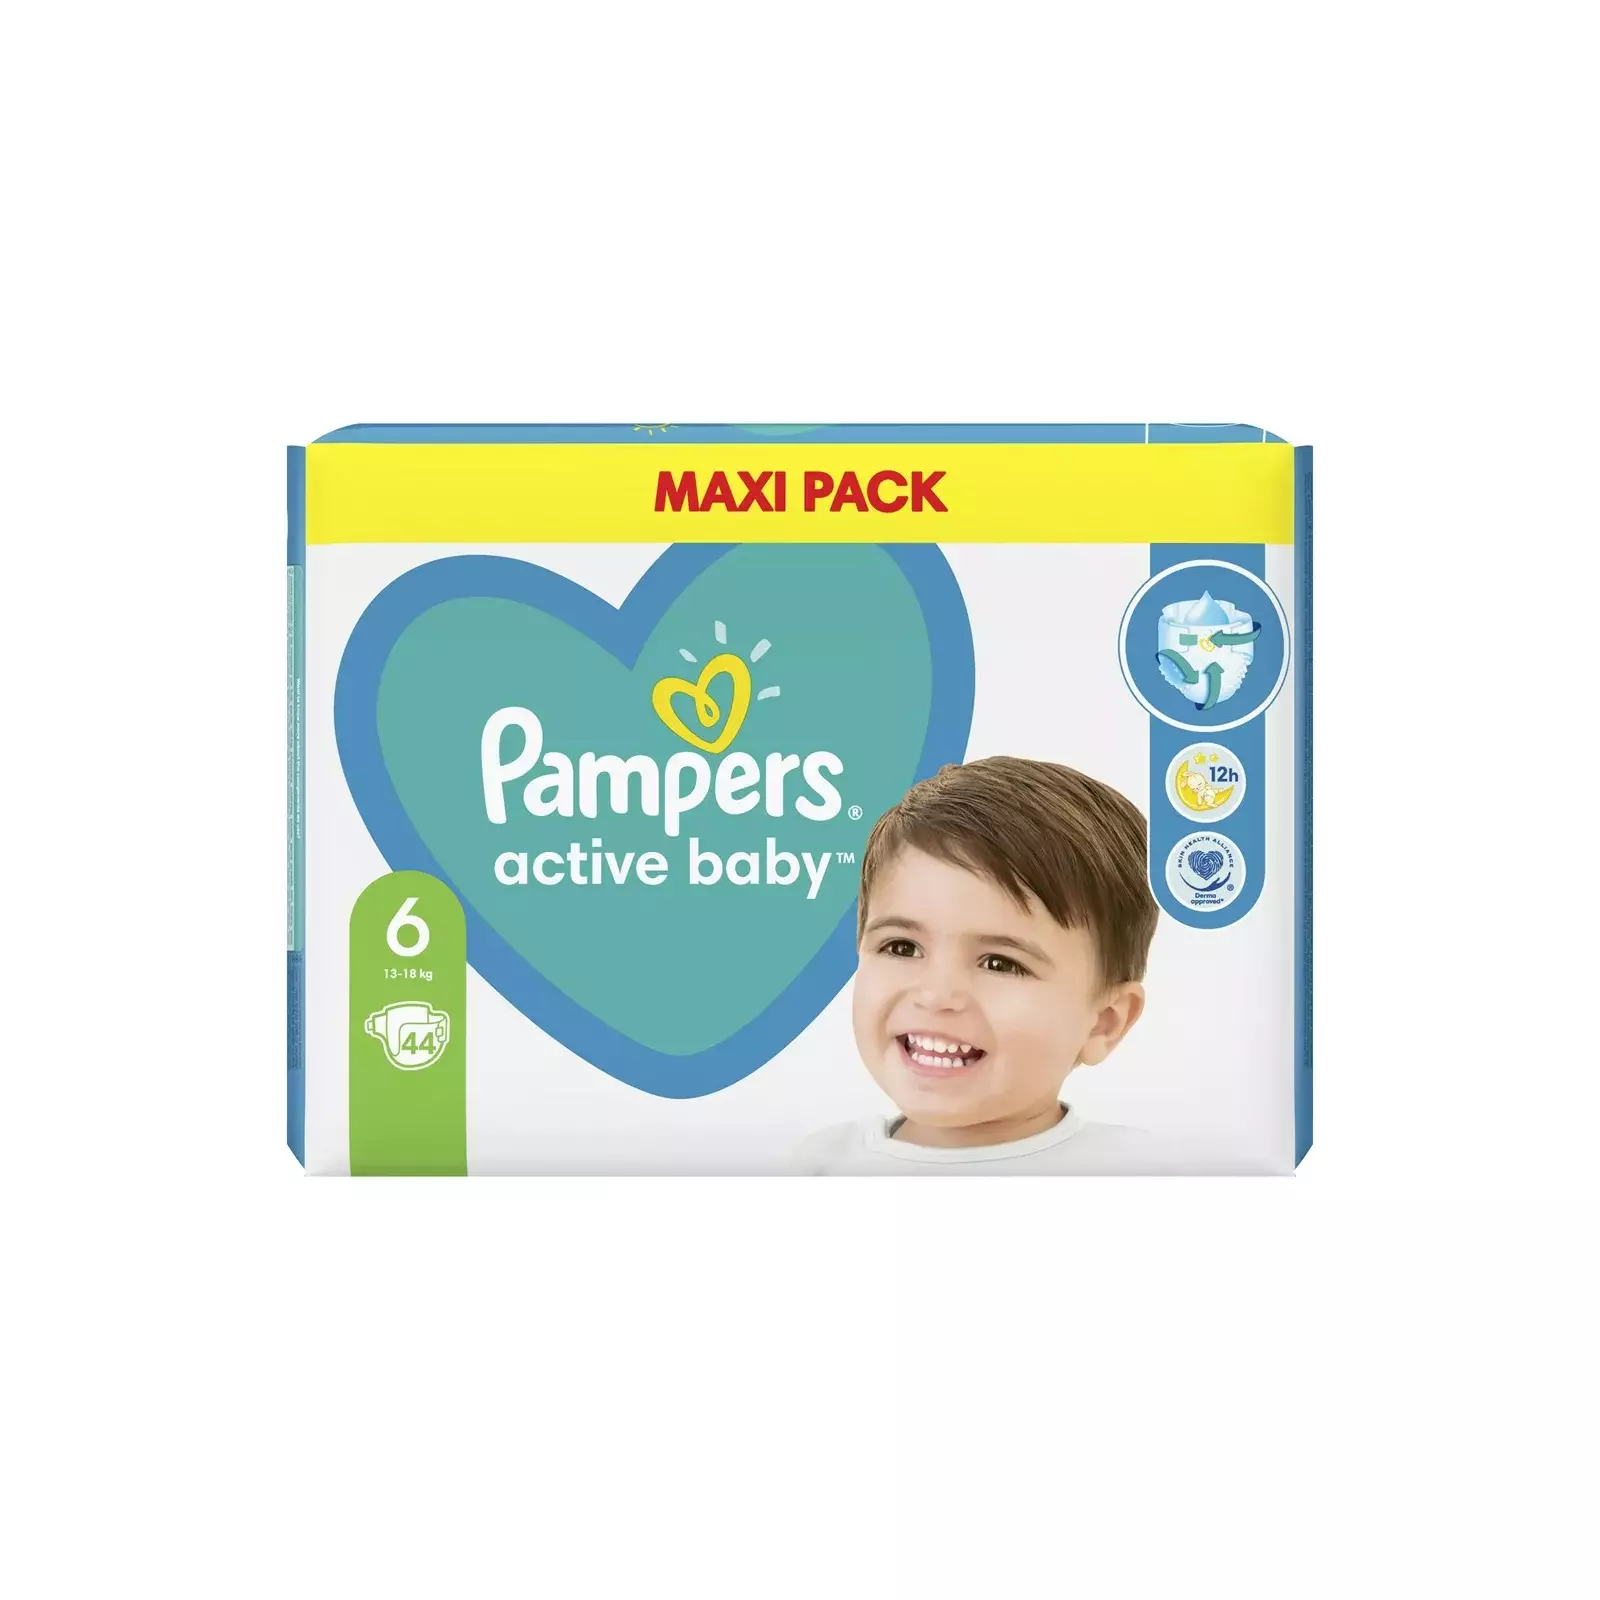 Pampers DIOPMPPIE0048 Photo 8